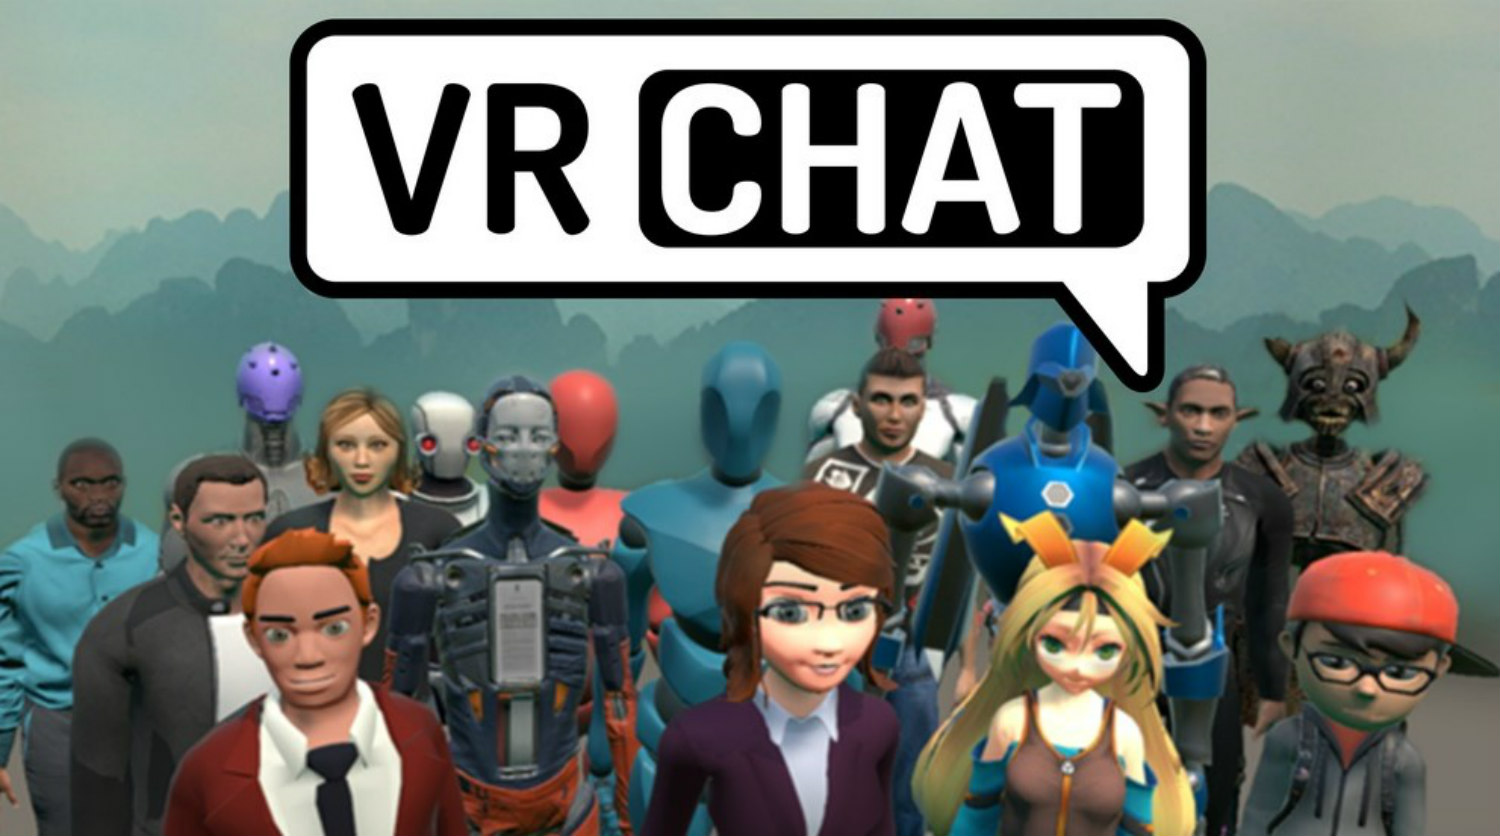 playstation vr chat